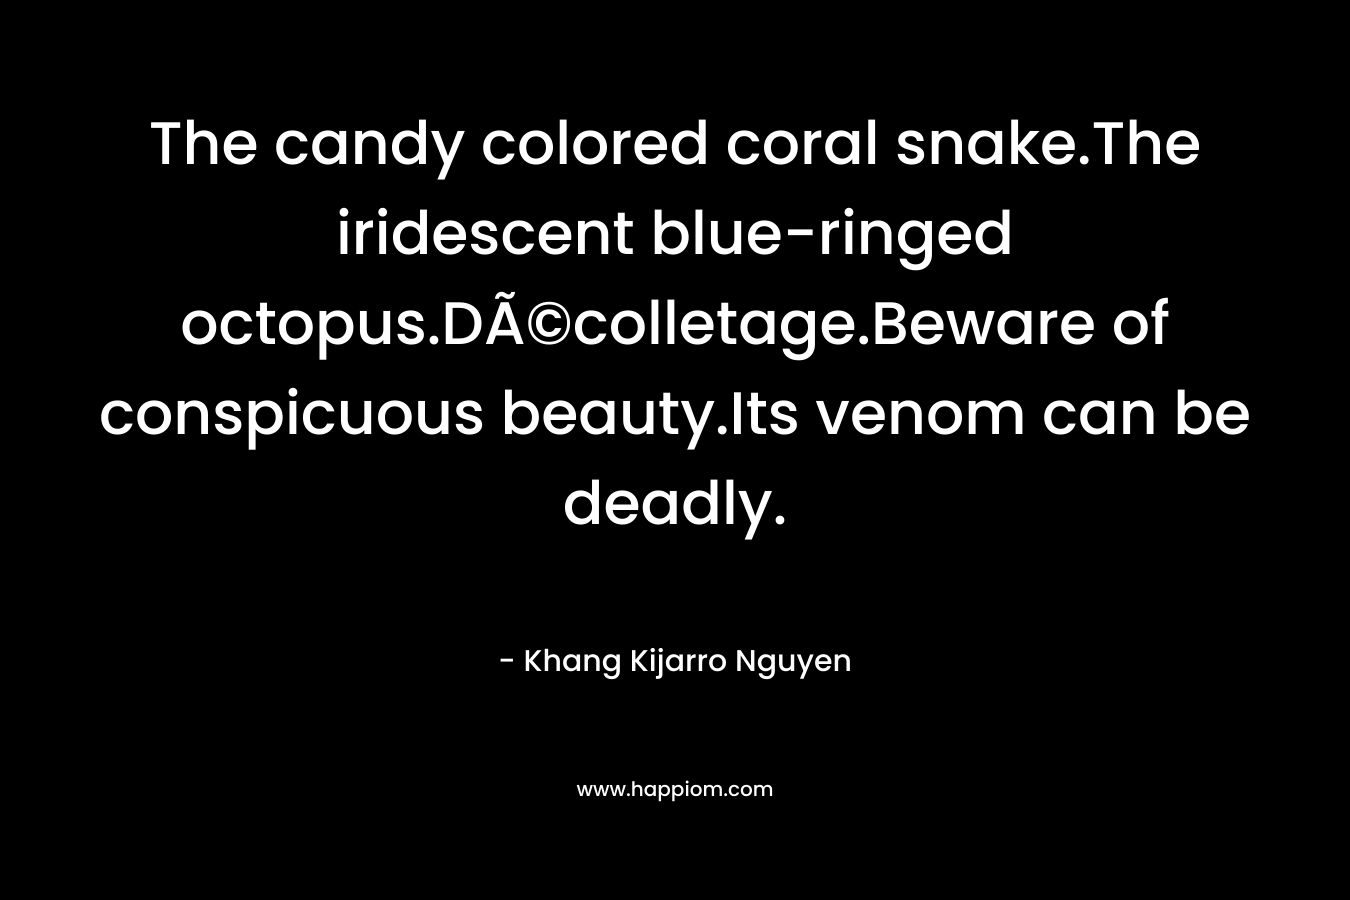 The candy colored coral snake.The iridescent blue-ringed octopus.DÃ©colletage.Beware of conspicuous beauty.Its venom can be deadly. – Khang Kijarro Nguyen